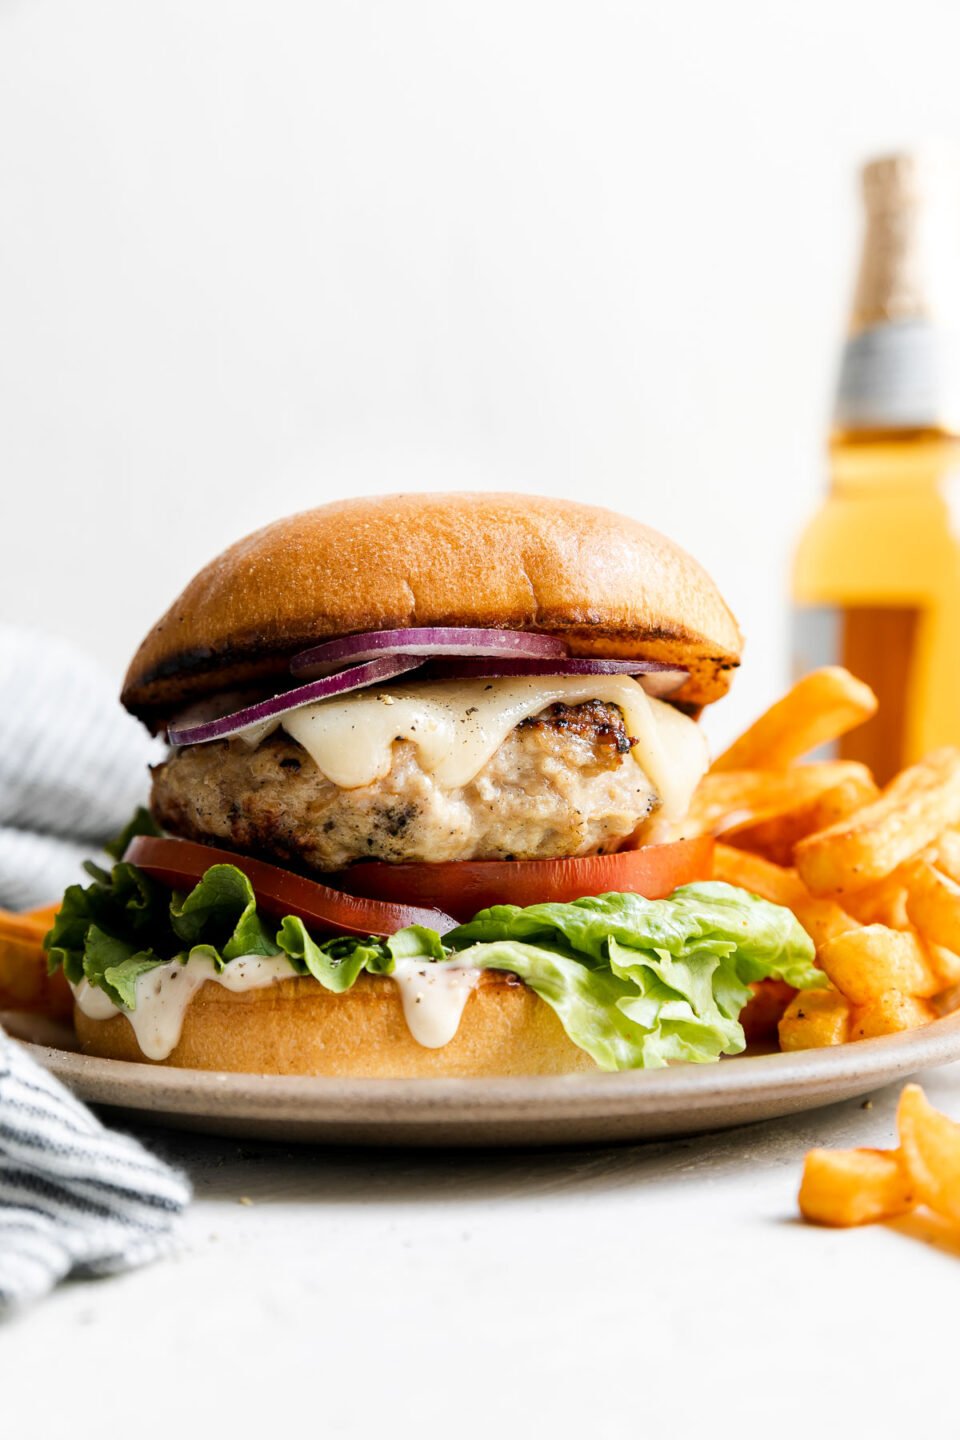 Grilled chicken burger is served on a small ceramic plate with french fries. The plate sits atop a creamy white textured surface with a blue and white striped linen napkin tucked alongside. A bottle of beer sits in the background out of focus.